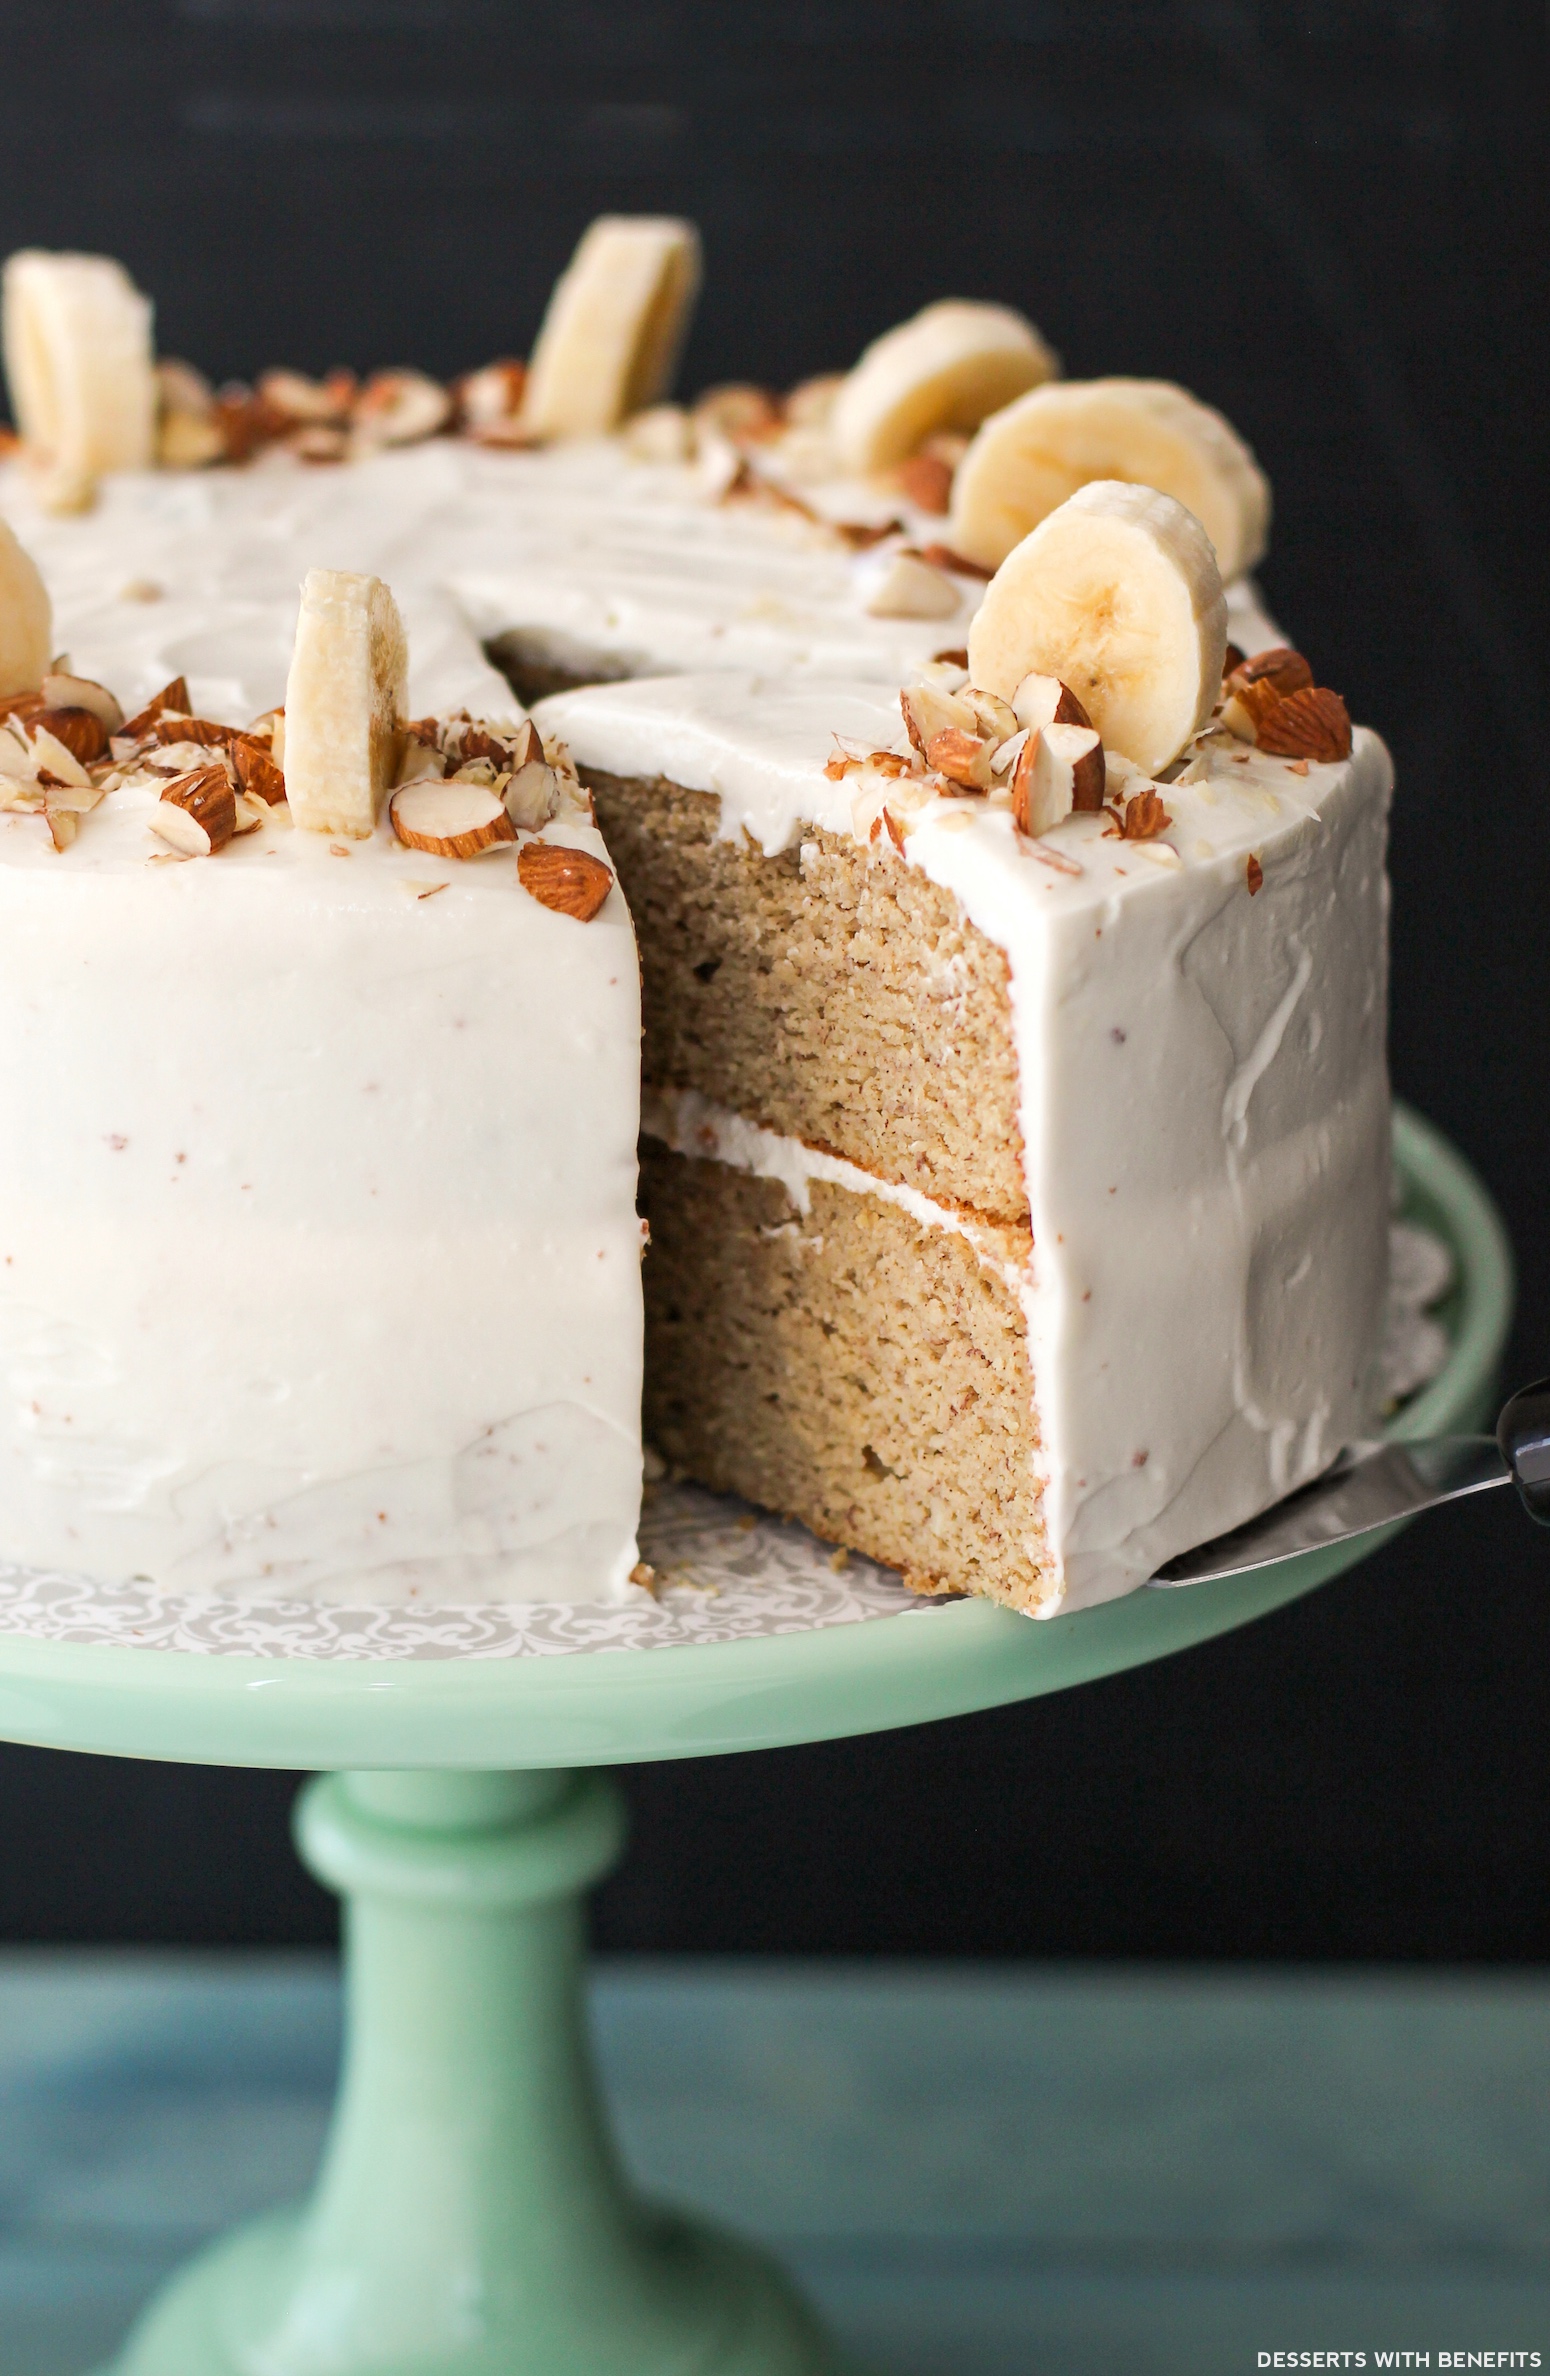 Healthy Banana Cake with Cream Cheese Frosting | Bob's Red Mill's